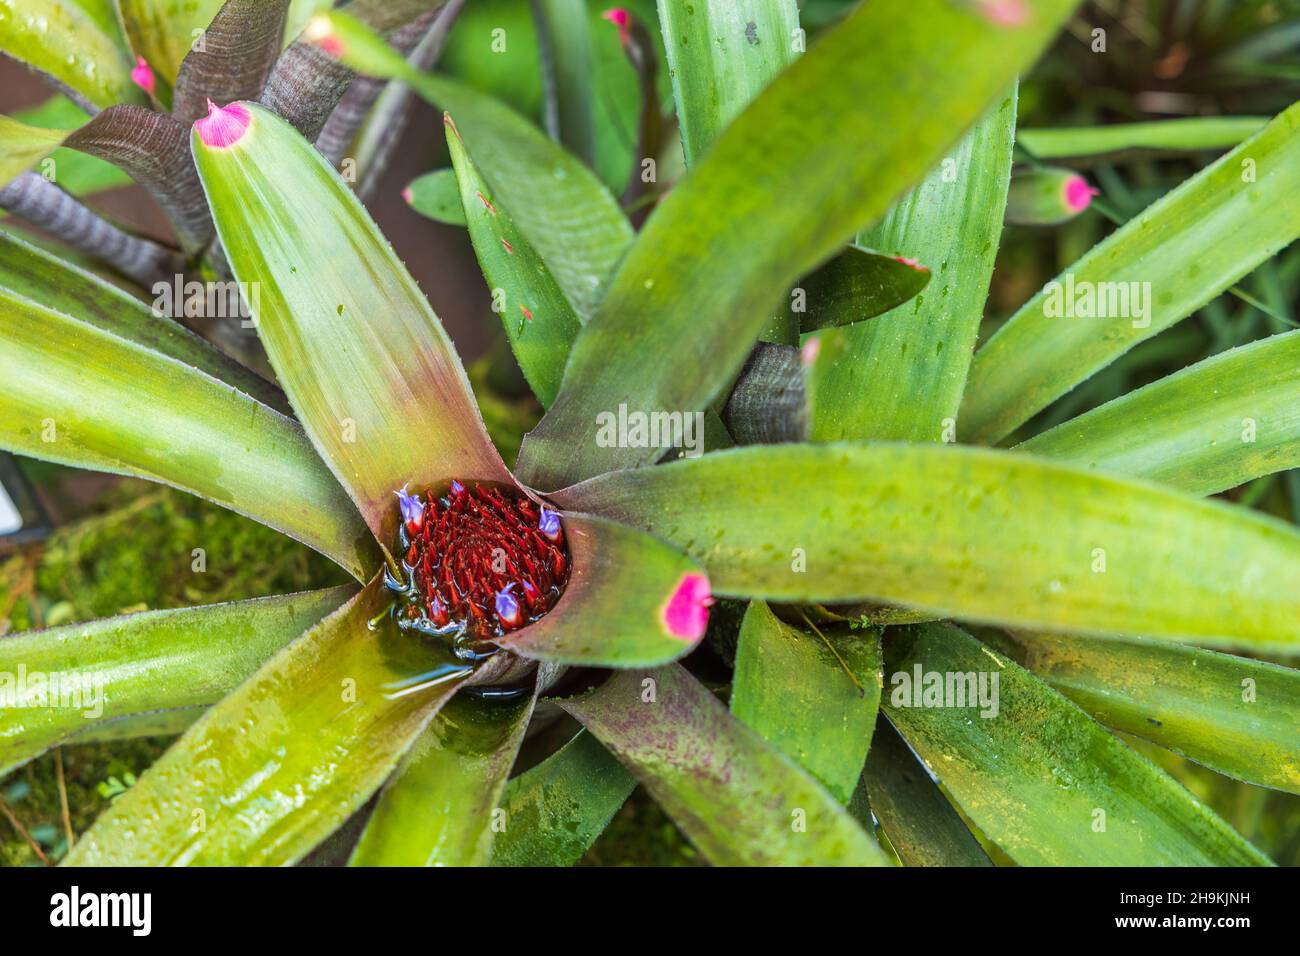 Close up view of Neoregelia Spectabilis tropical flower. Beautiful nature backgrounds. Stock Photo